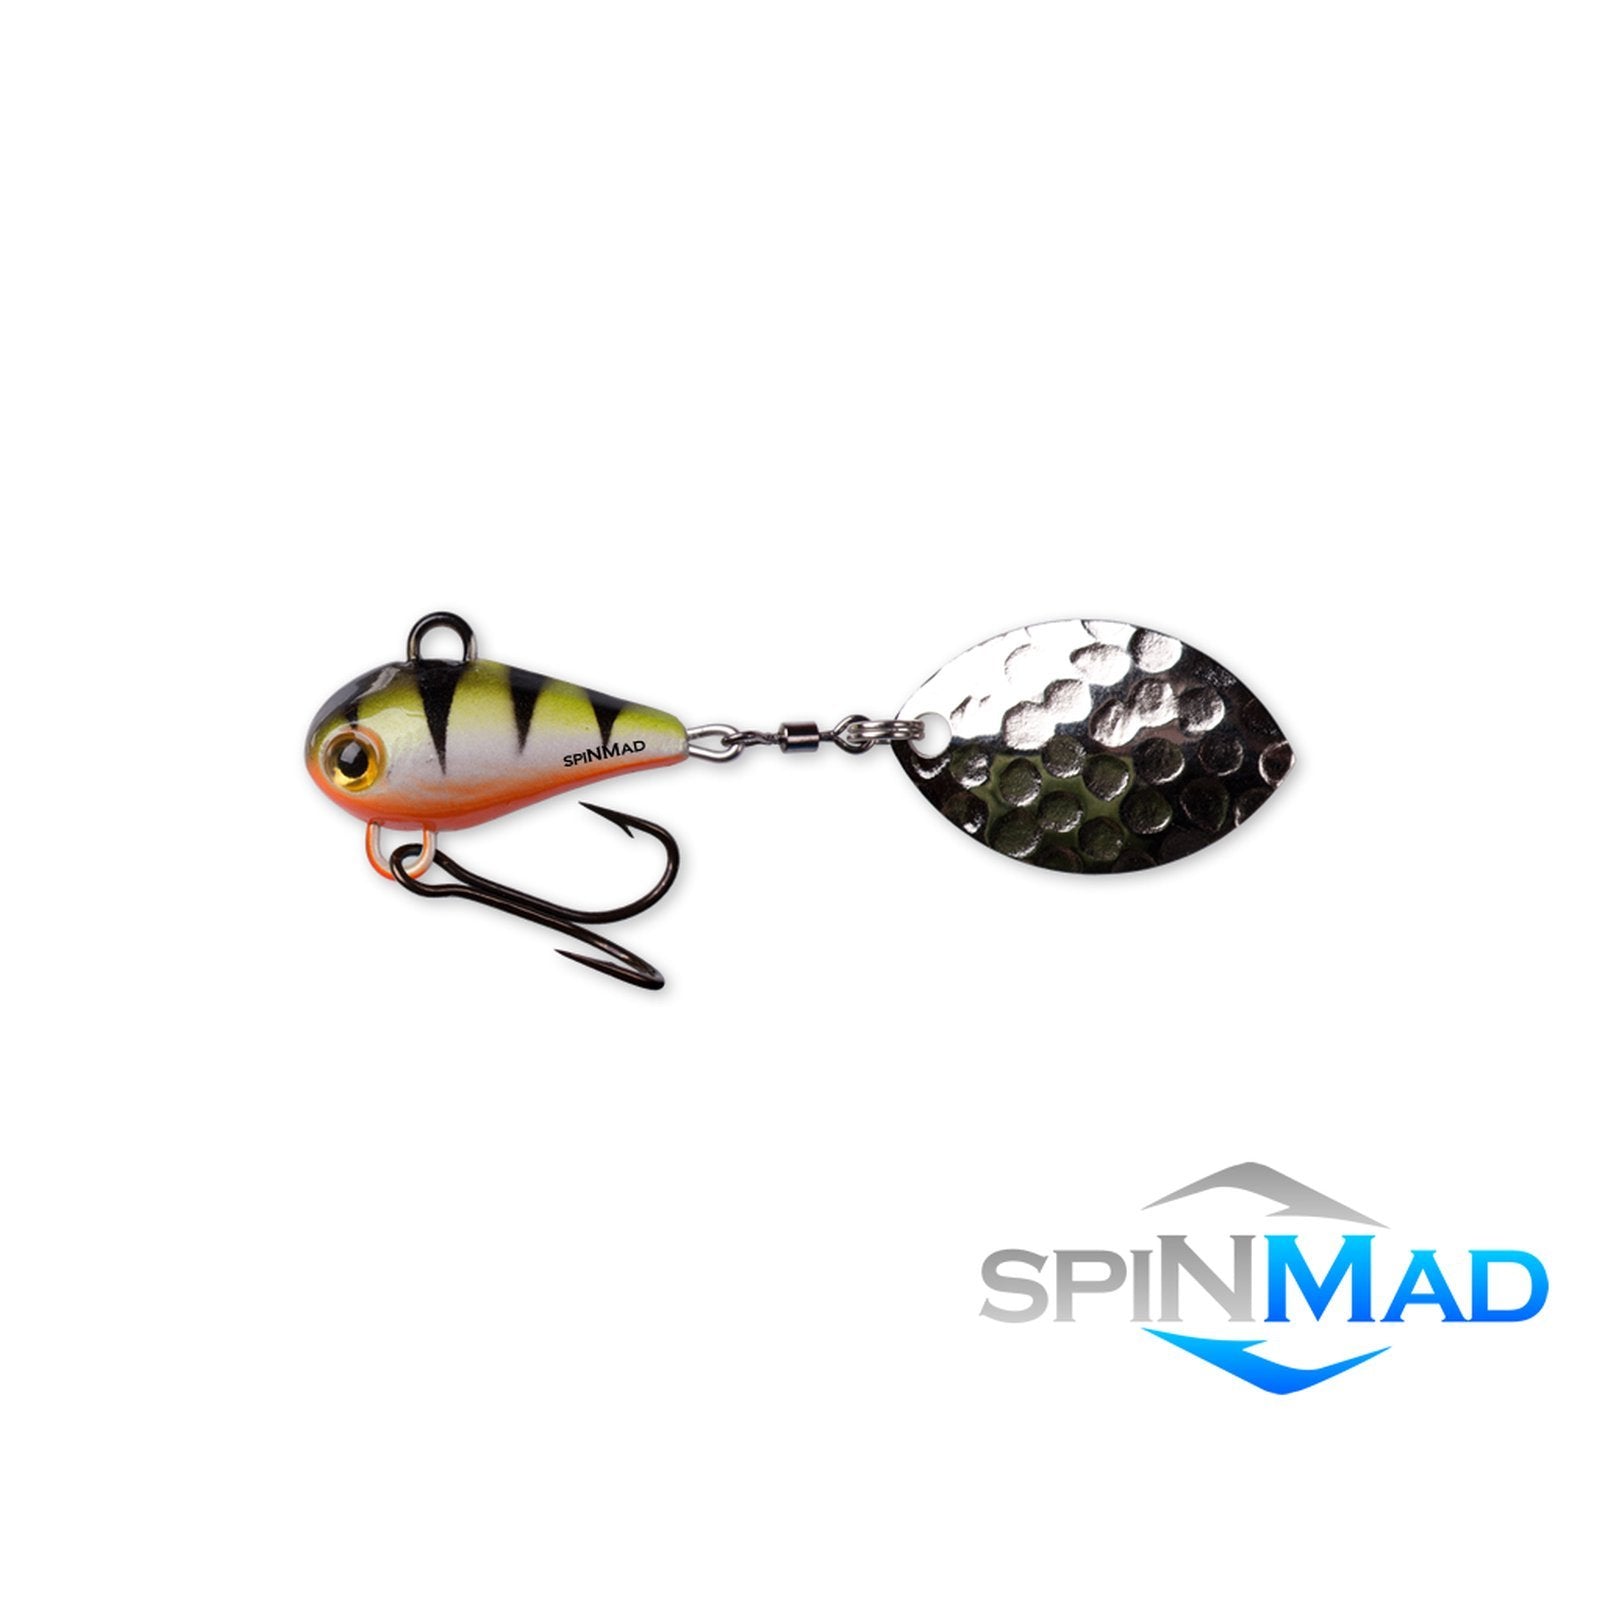 SpinMad MAG 6 0708